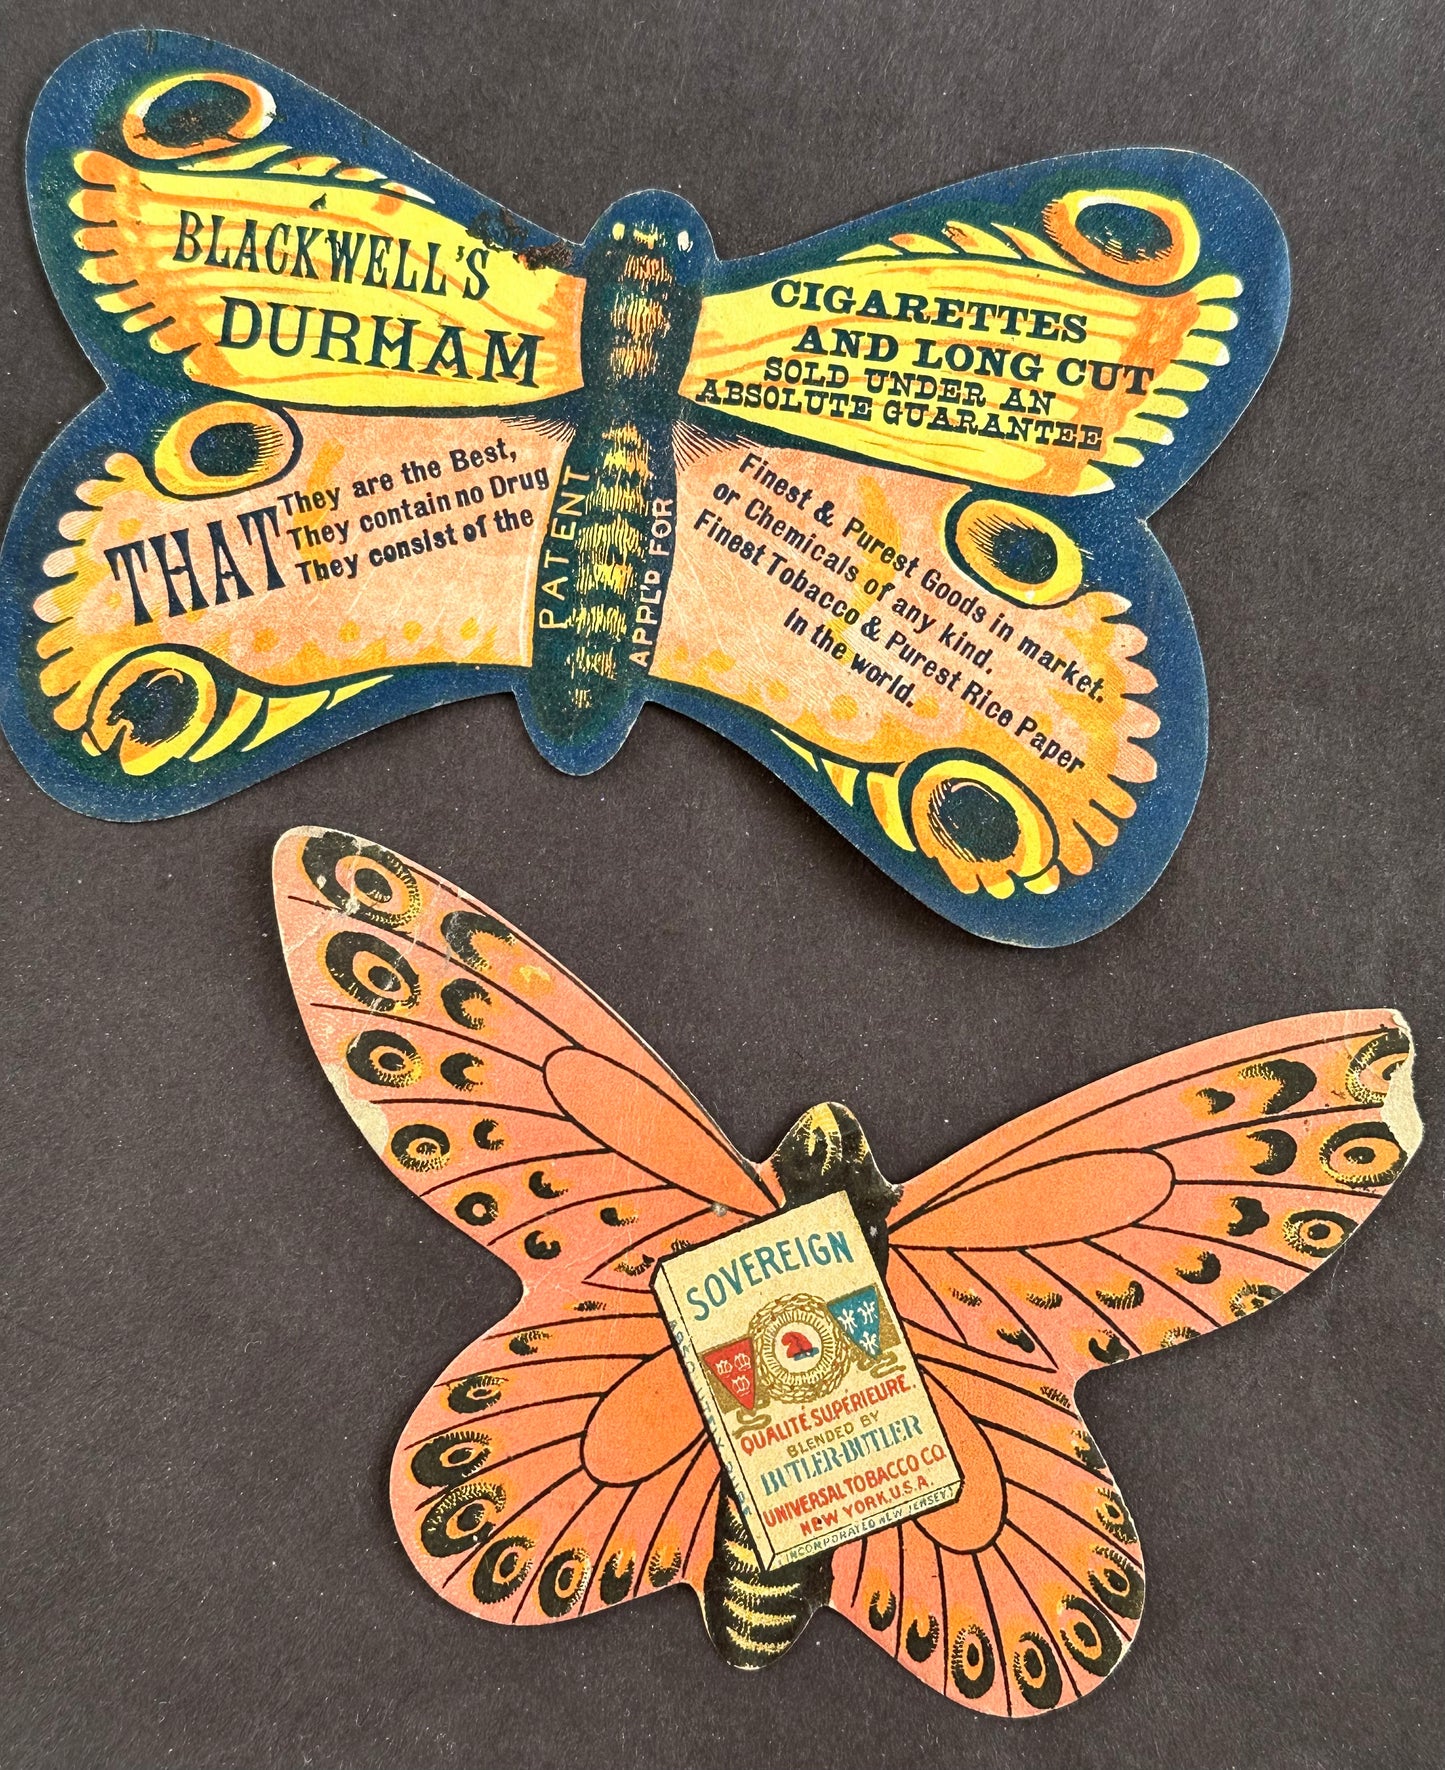 Two Butterfly-Shaped Tobacco Trade Cards (19th century)